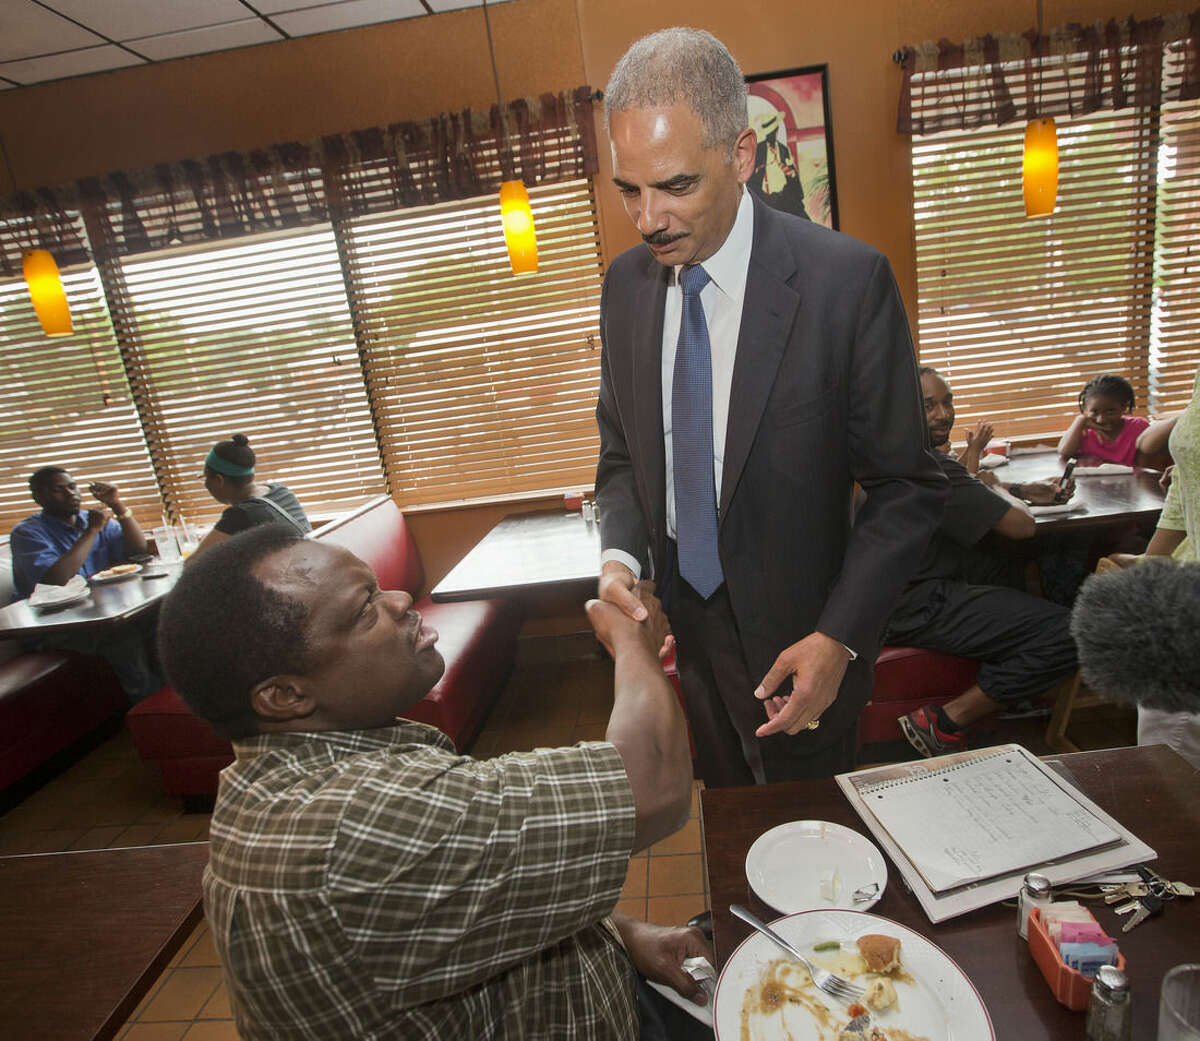 Attorney General Eric Holder stops to shake hands with a patron at Drake's Place Restaurant, before his meeting with local community leaders, Wednesday, Aug. 20, 2014 in Ferguson, Mo. Holder arrived in Missouri on Wednesday, a small group of protesters gathered outside the building where a grand jury could begin hearing evidence to determine whether a Ferguson police officer who shot 18-year-old Michael Brown should be charged in his death. (AP Photo/Pablo Martinez Monsivais, Pool)